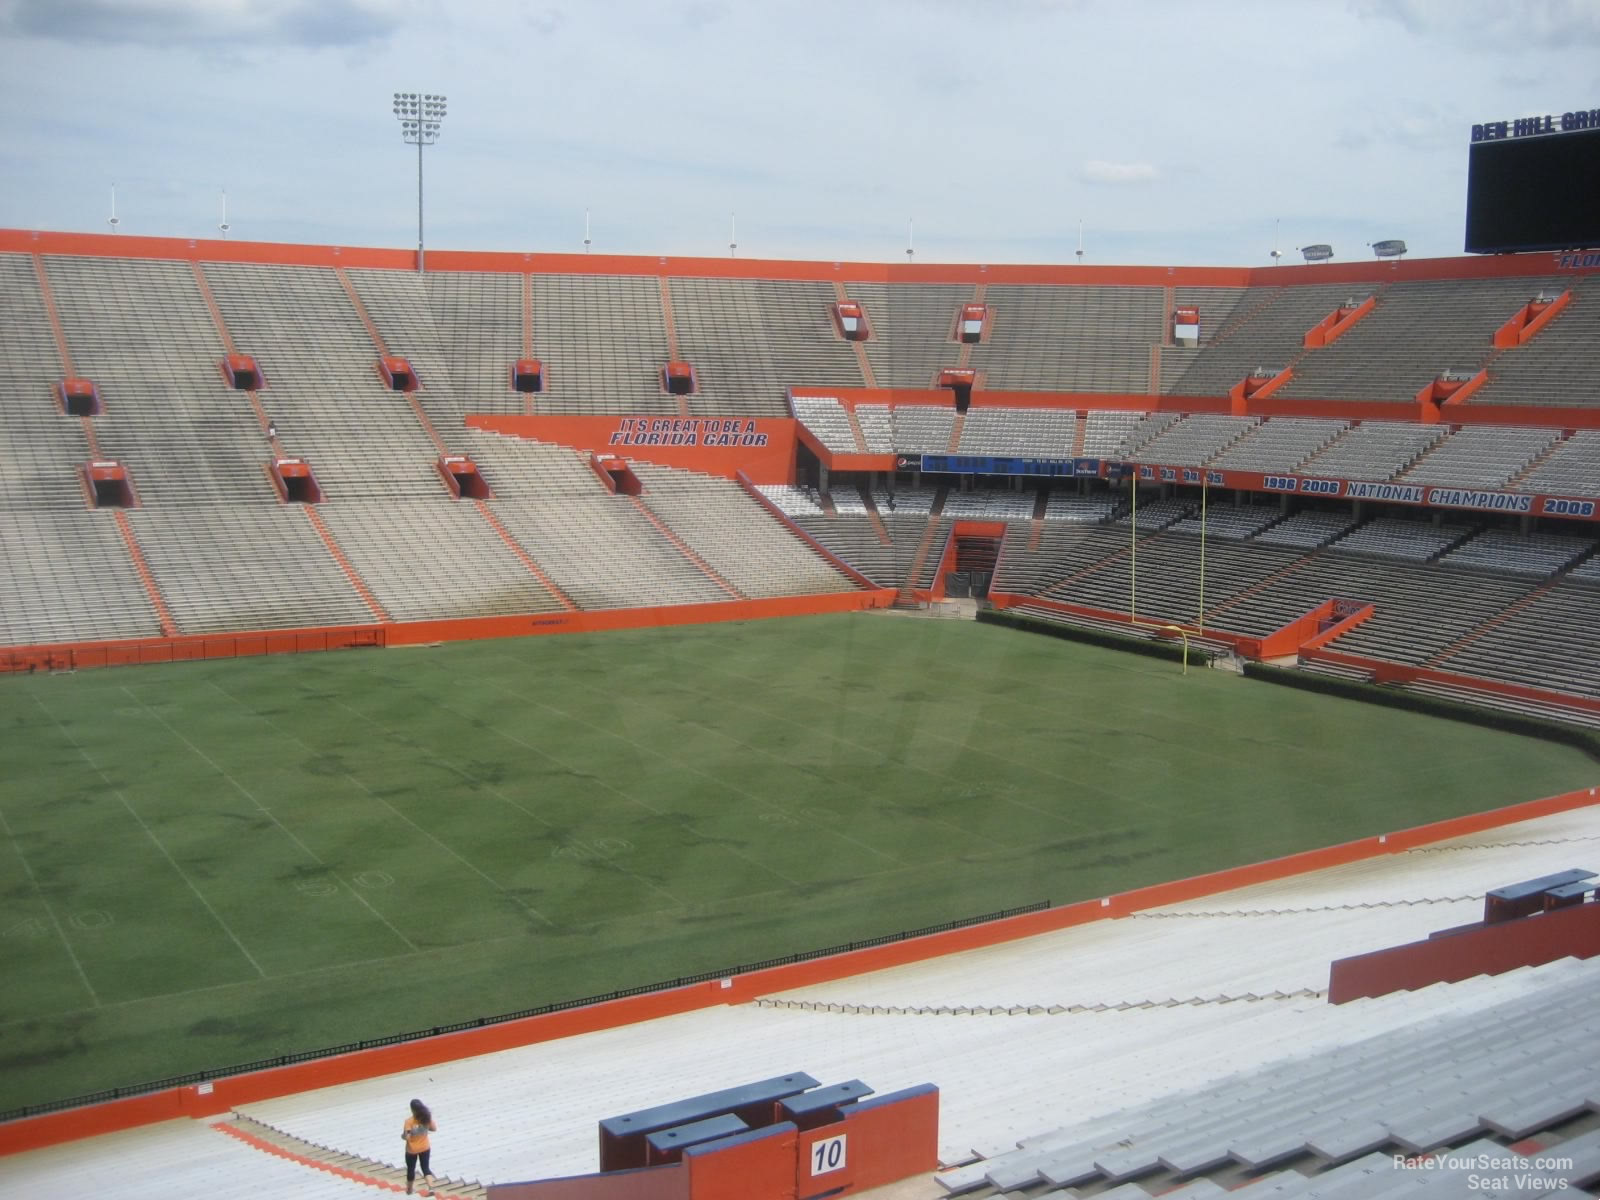 section 11, row 58 seat view  - ben hill griffin stadium